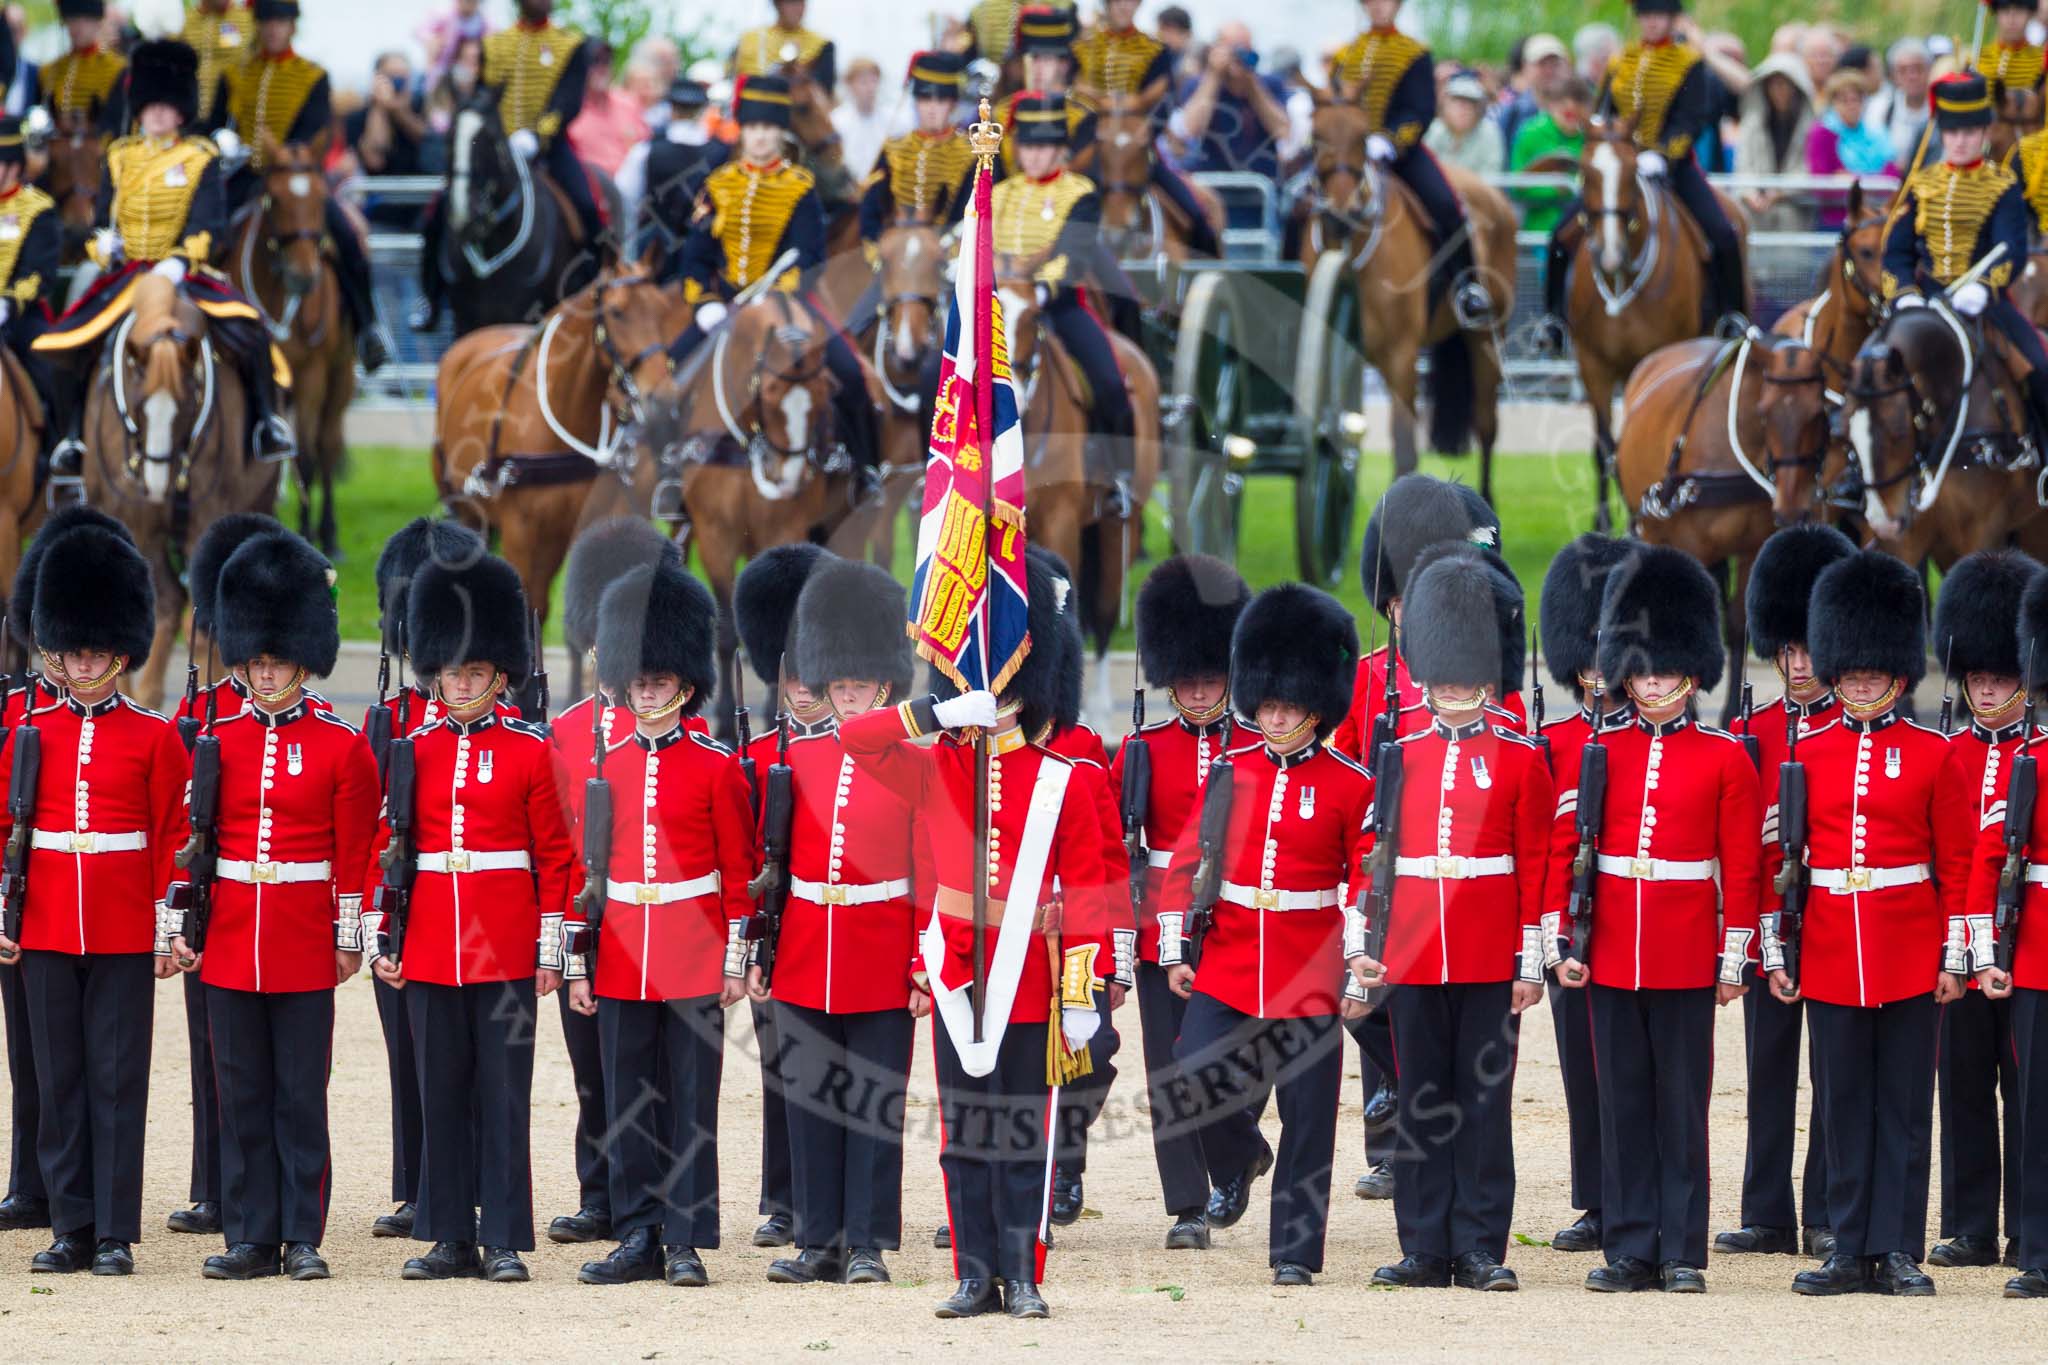 The Colonel's Review 2015.
Horse Guards Parade, Westminster,
London,

United Kingdom,
on 06 June 2015 at 11:48, image #446